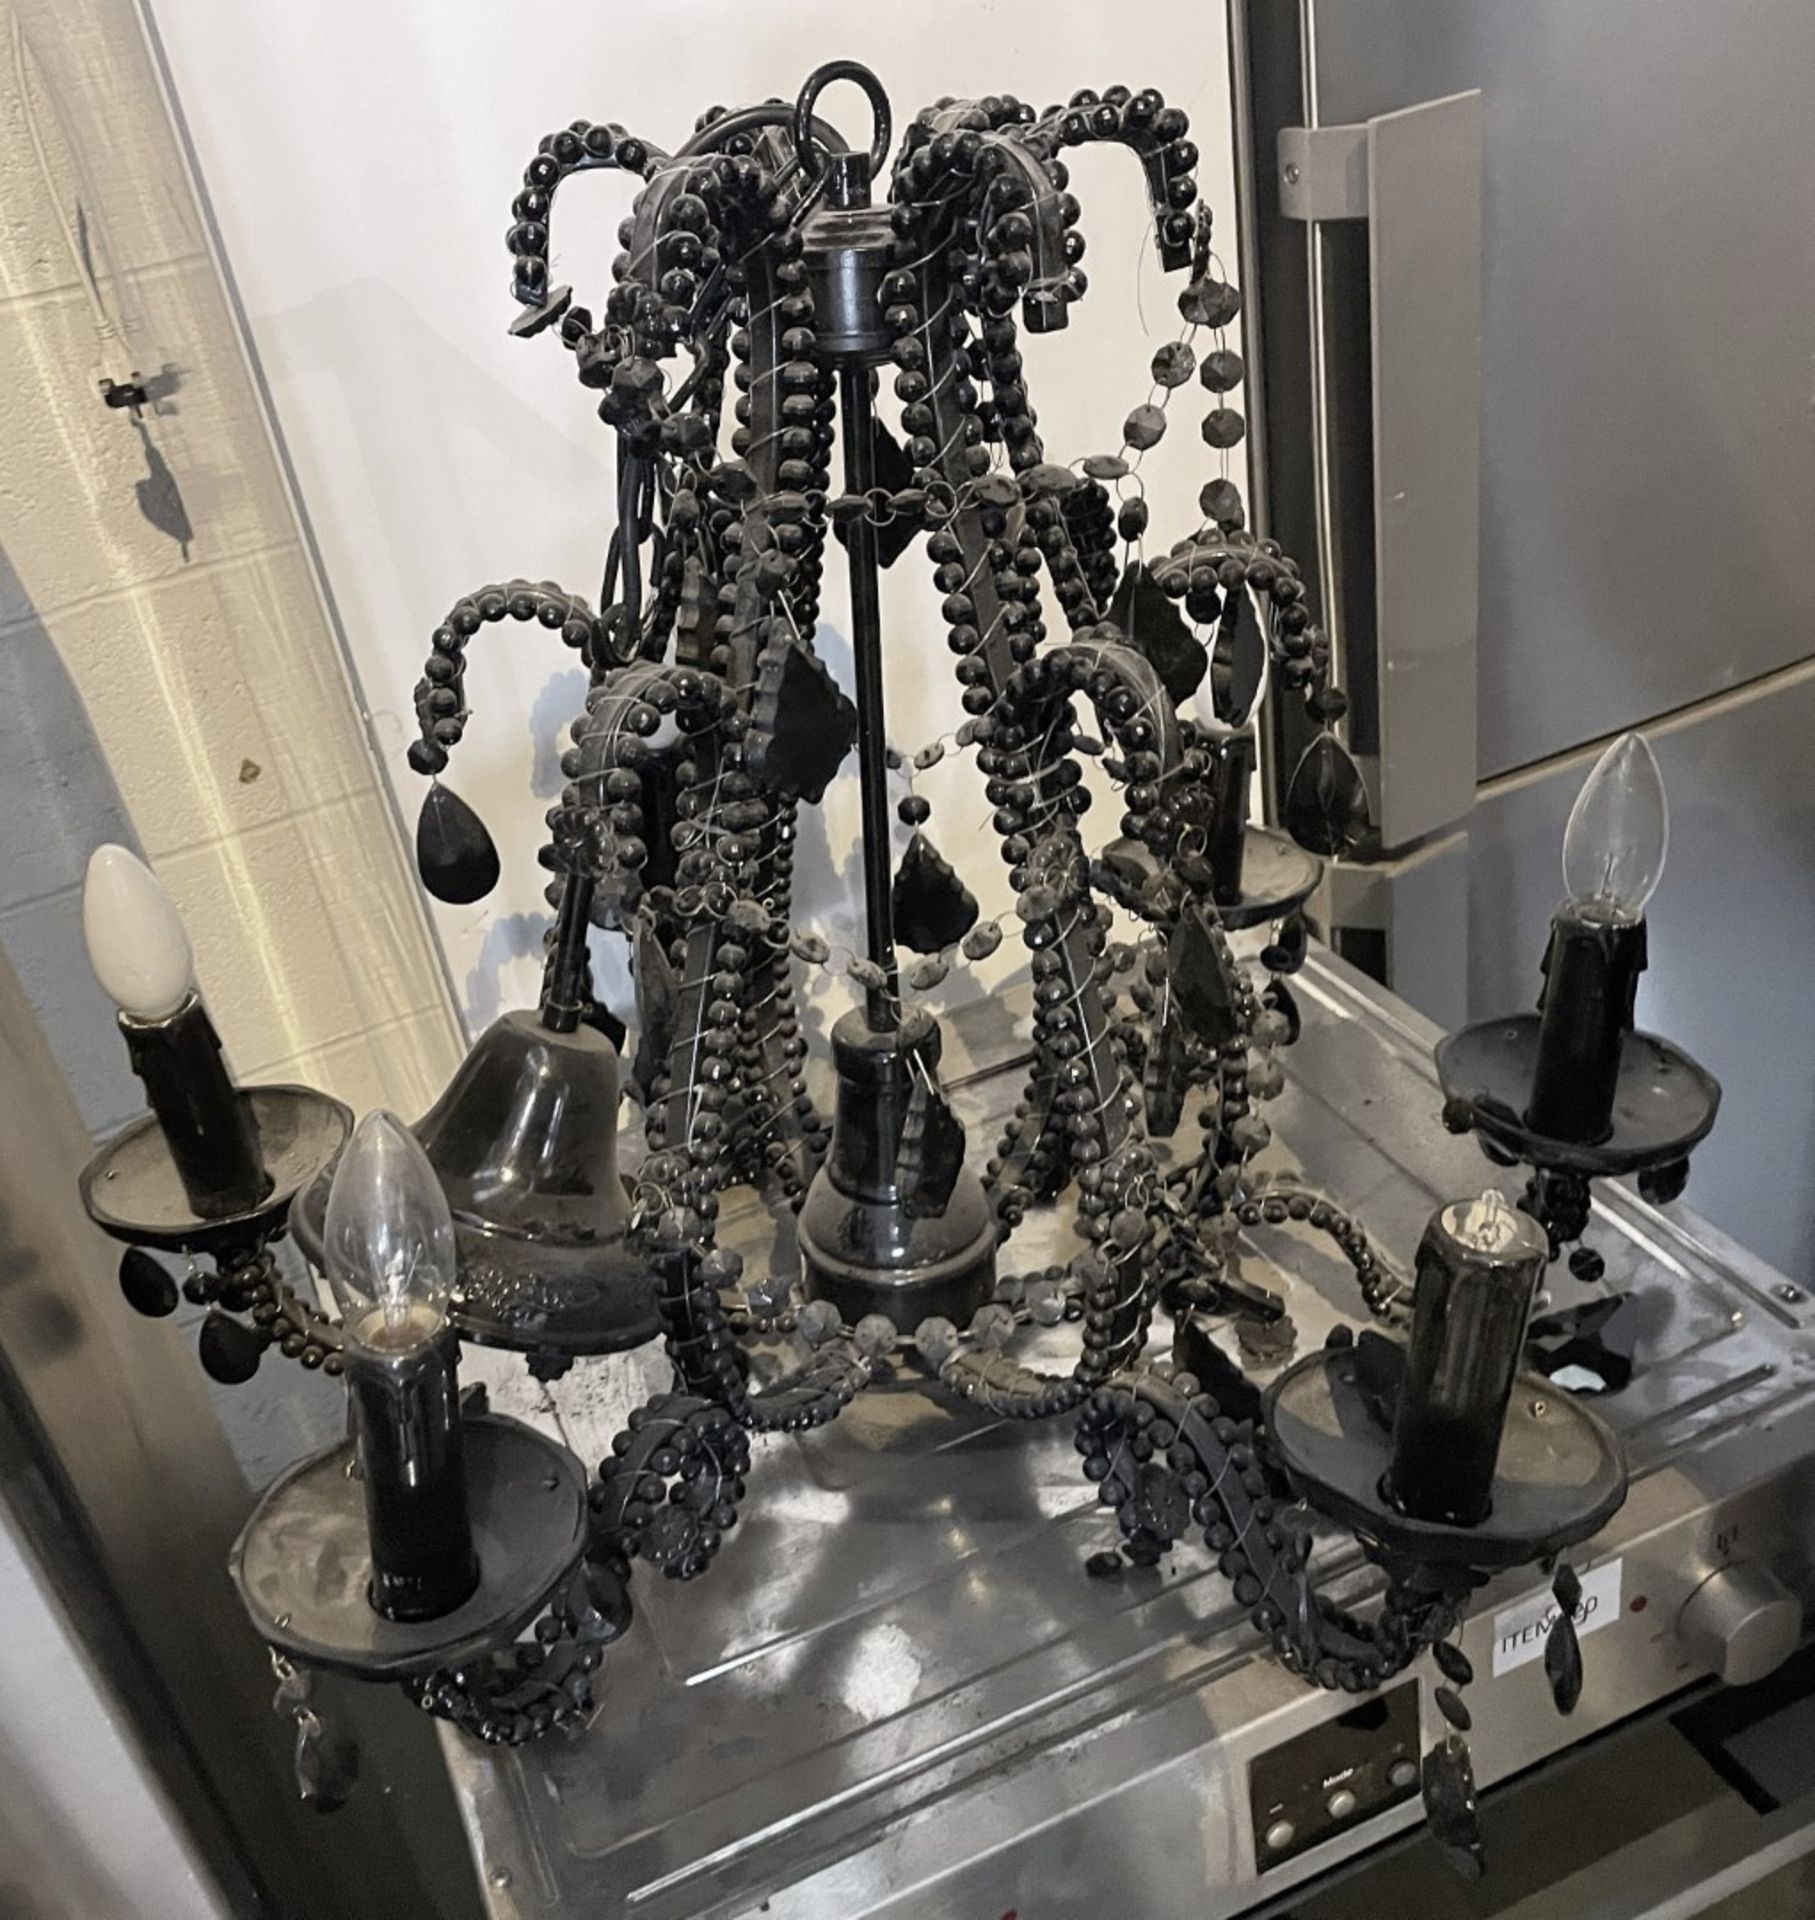 1 x Black Ornate Chandelier - Ref: J122 - CL531 - Location: Essex, RM19 Recently removed from a - Image 4 of 4